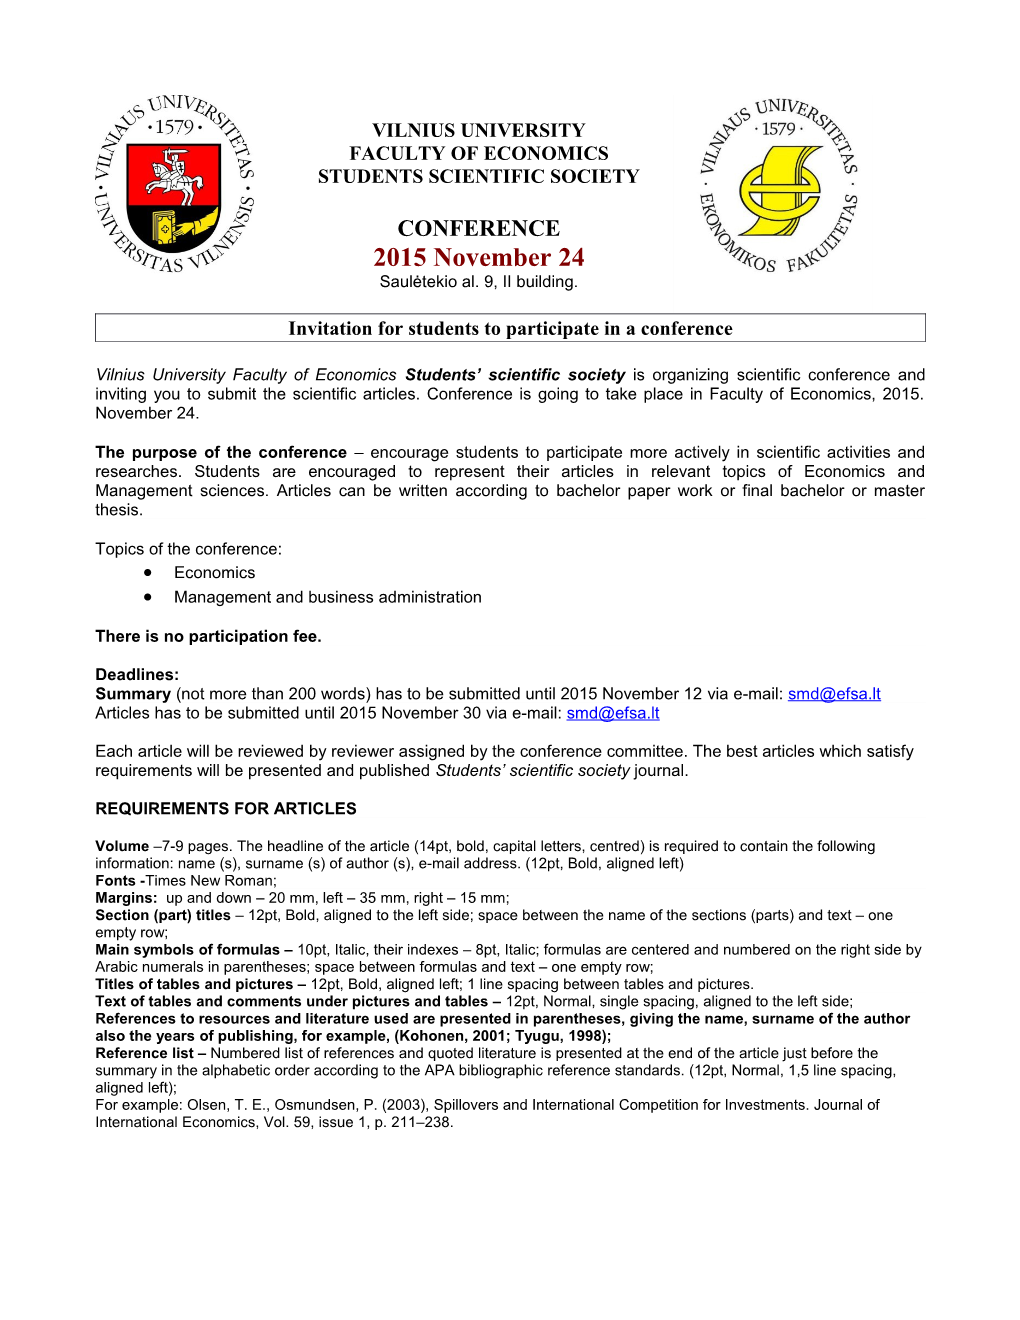 Invitation for Students to Participate in a Conference